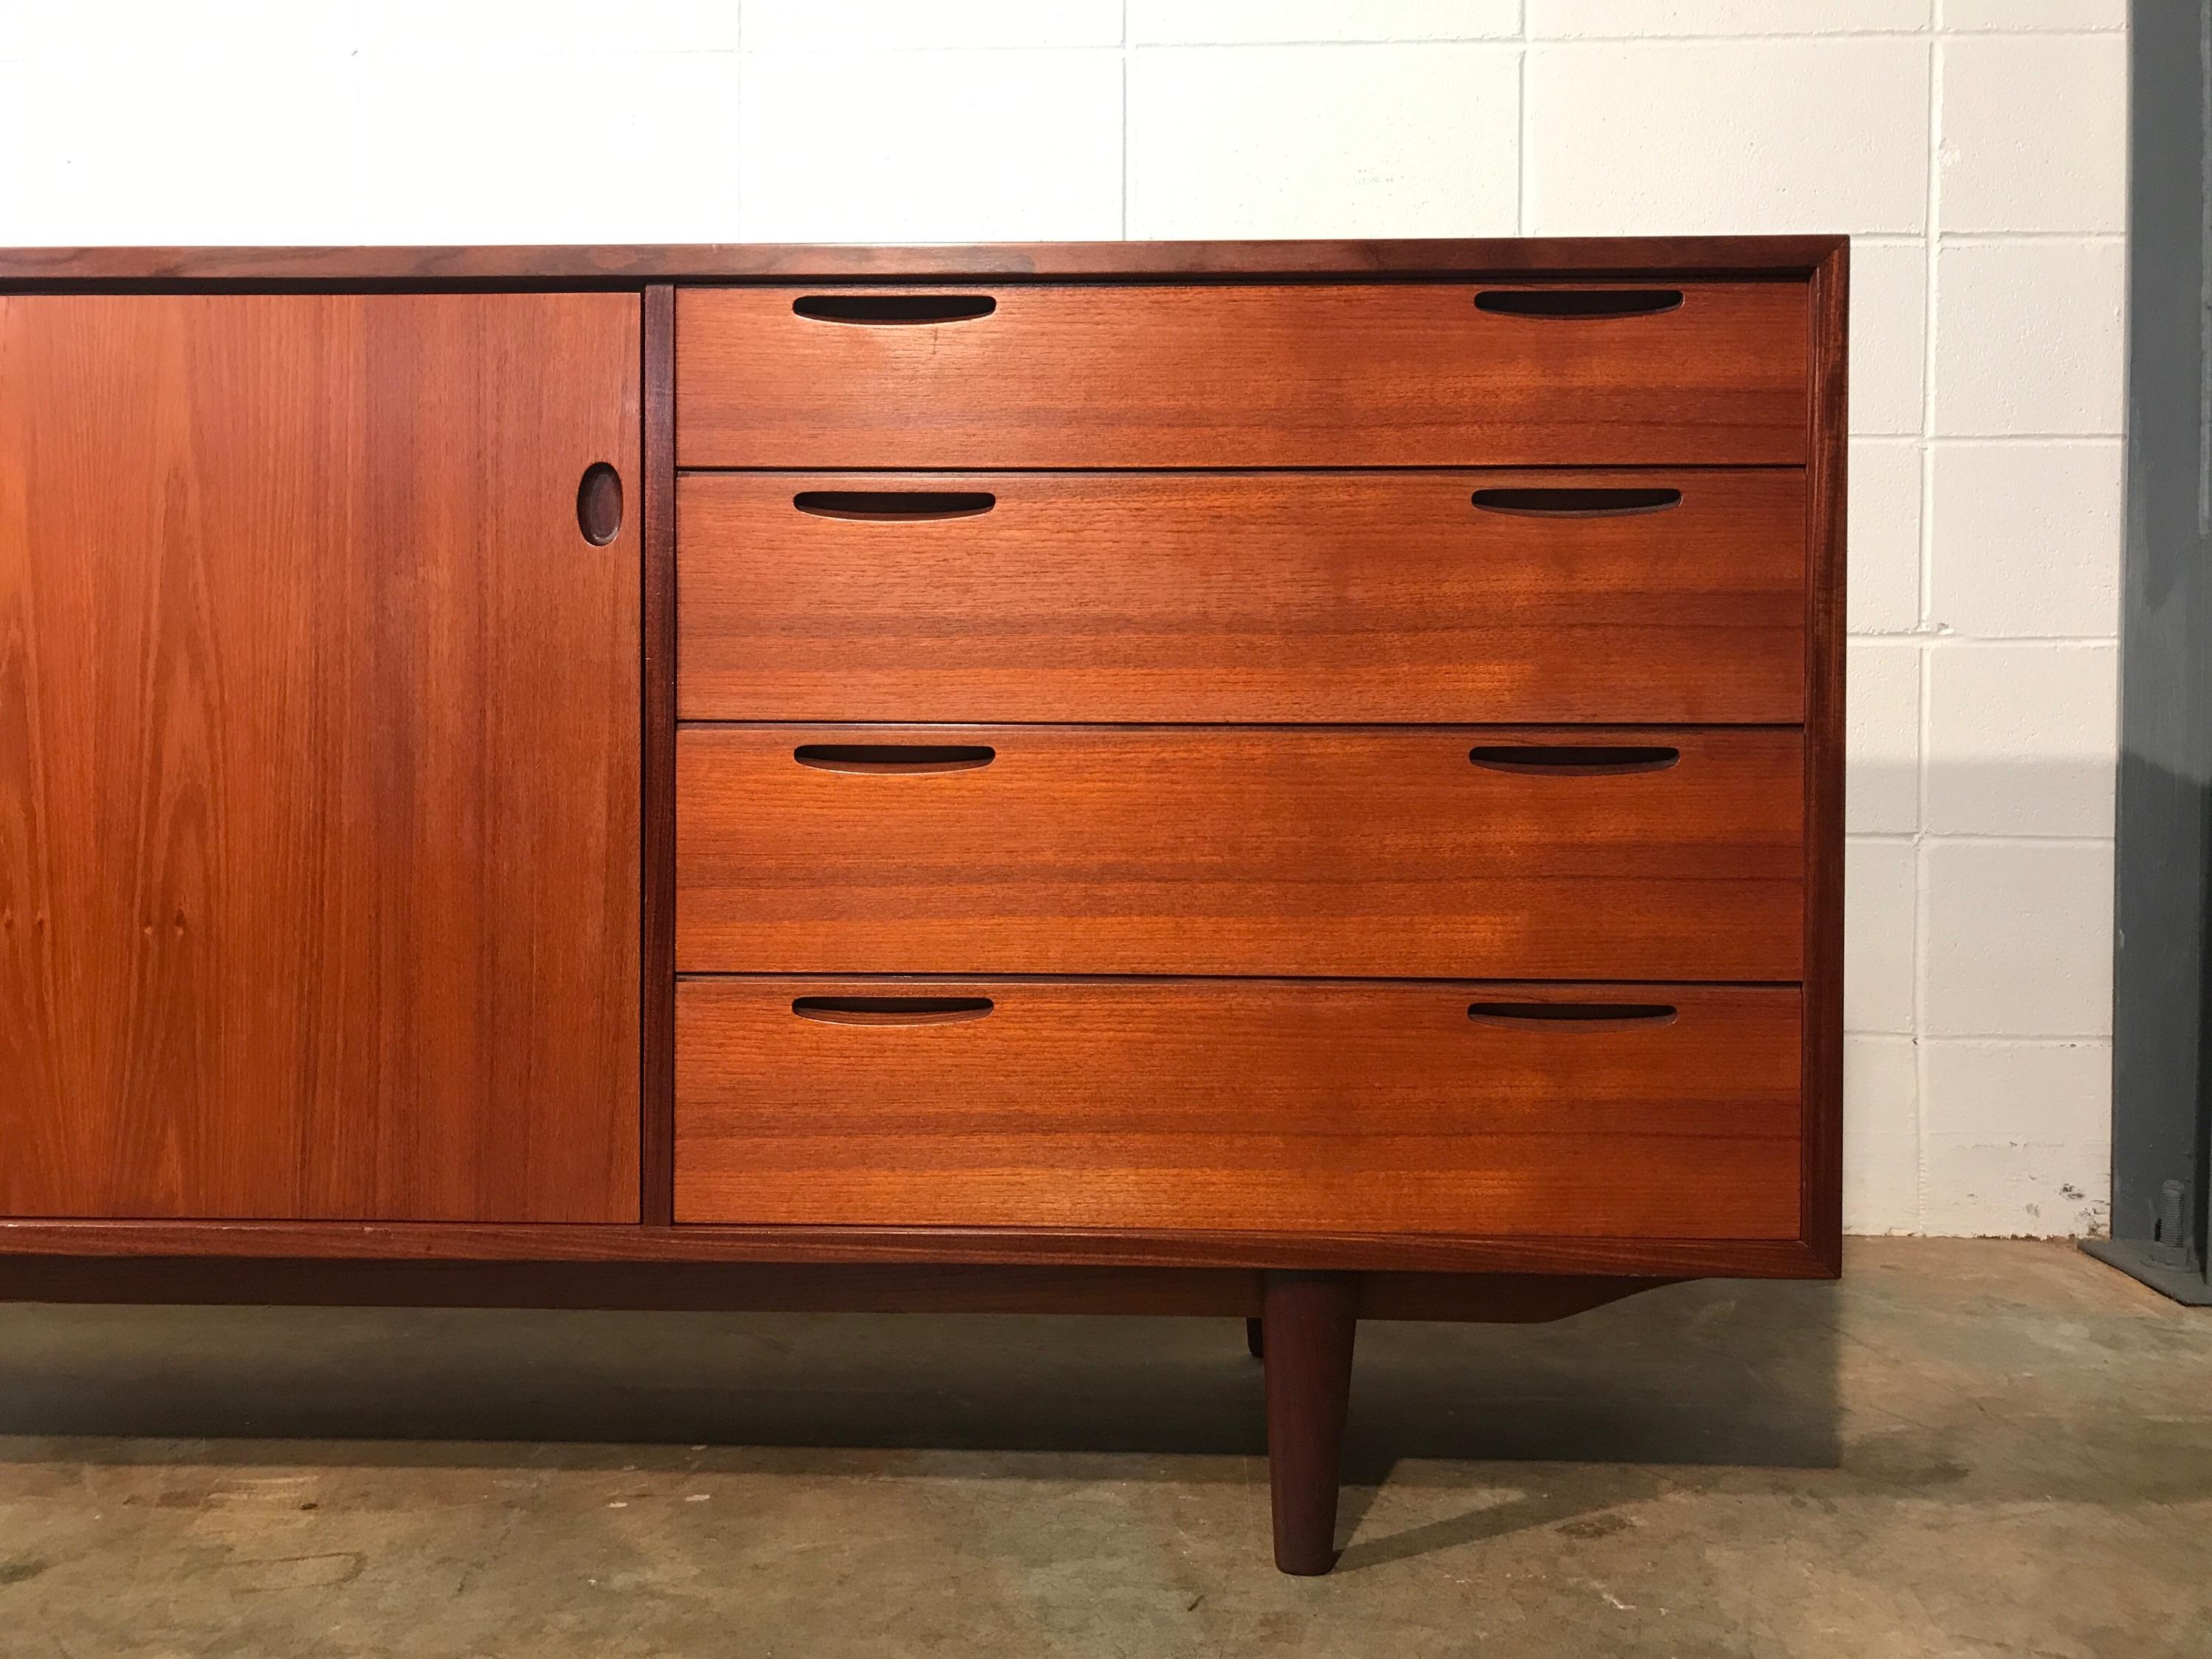 1950s Danish Modern Teak Credenza By IB Kofod Larsen For Brande Mobelfabrik.
Quality construction in this 1950s credenza. Over 6.5 FT long teak credenza with a total of six drawers plus shelving for plenty of room for storage. This piece is